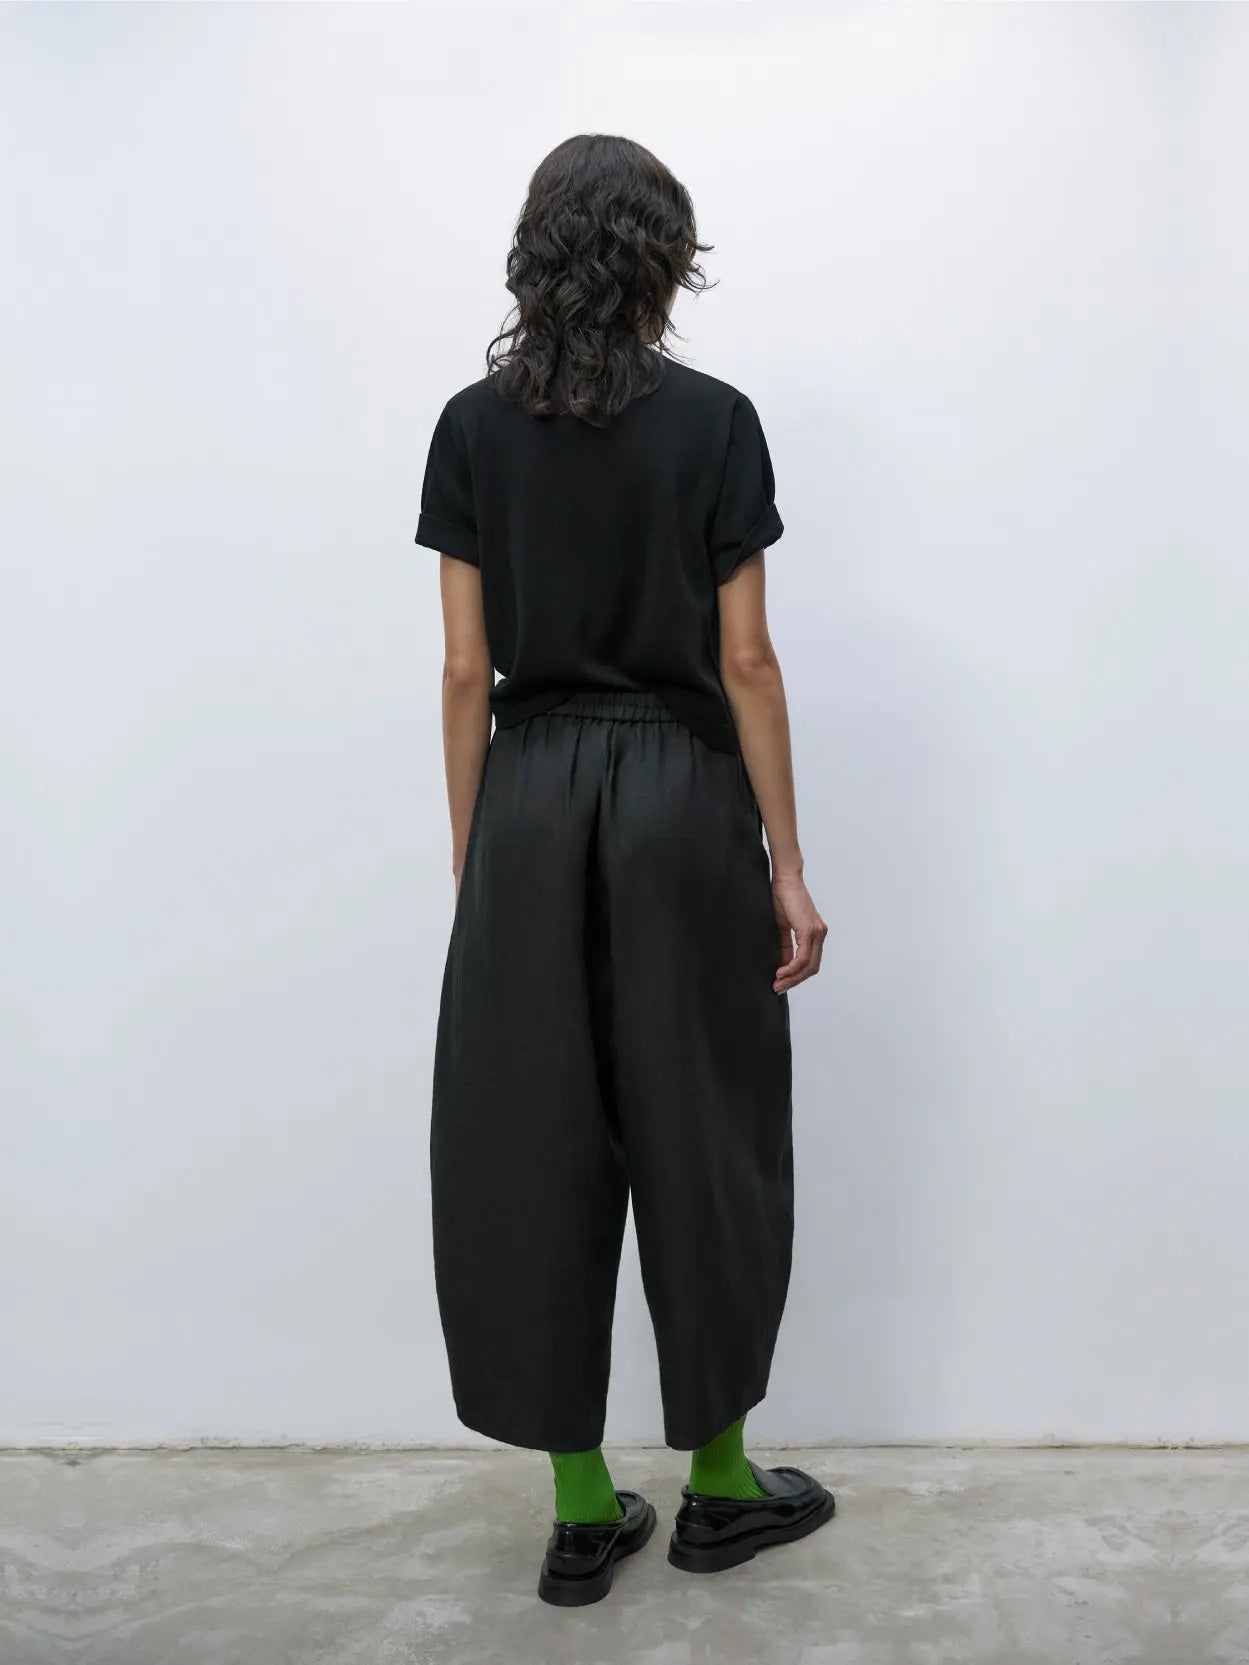 A pair of black, wide-leg trousers with an elastic waistband and a single button closure. The trousers have a clean, minimalist design with visible front pleats running from the waistband to the hem. The fabric appears to be smooth and slightly structured, available exclusively at our Barcelona store. These are the Linen Curved Pants Black by Cordera.